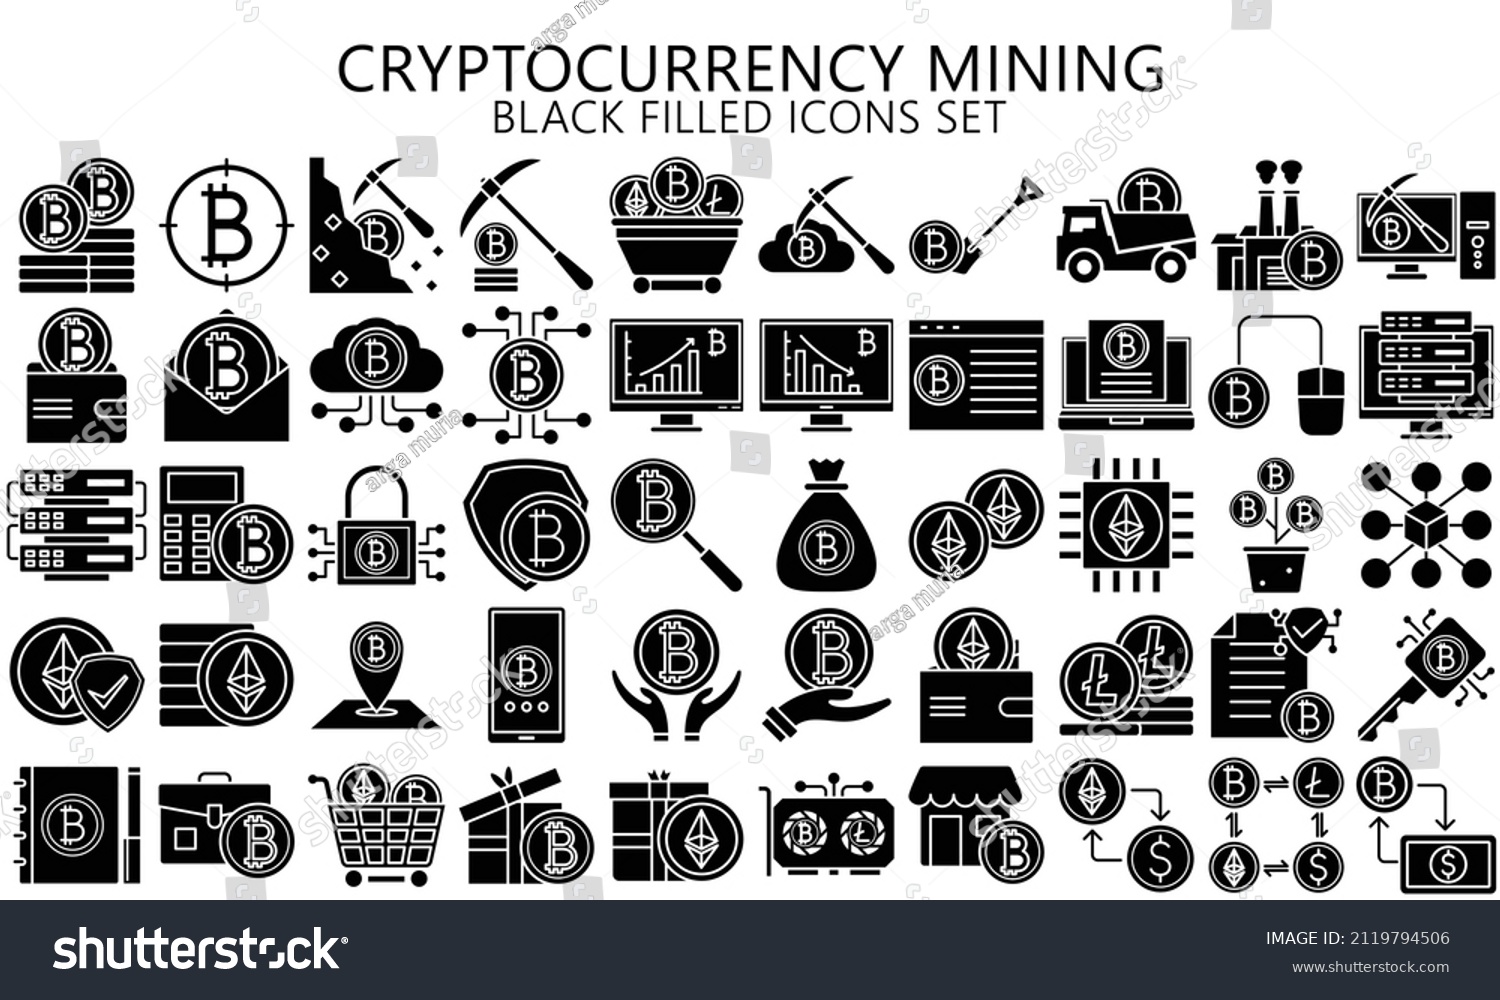 SVG of Cryptocurrency mining black filled color icon set. fintech pictograms for web and mobile app GUI. Blockchain technology simple UI, UX and applications, vector EPS 10 ready convert to SVG. svg